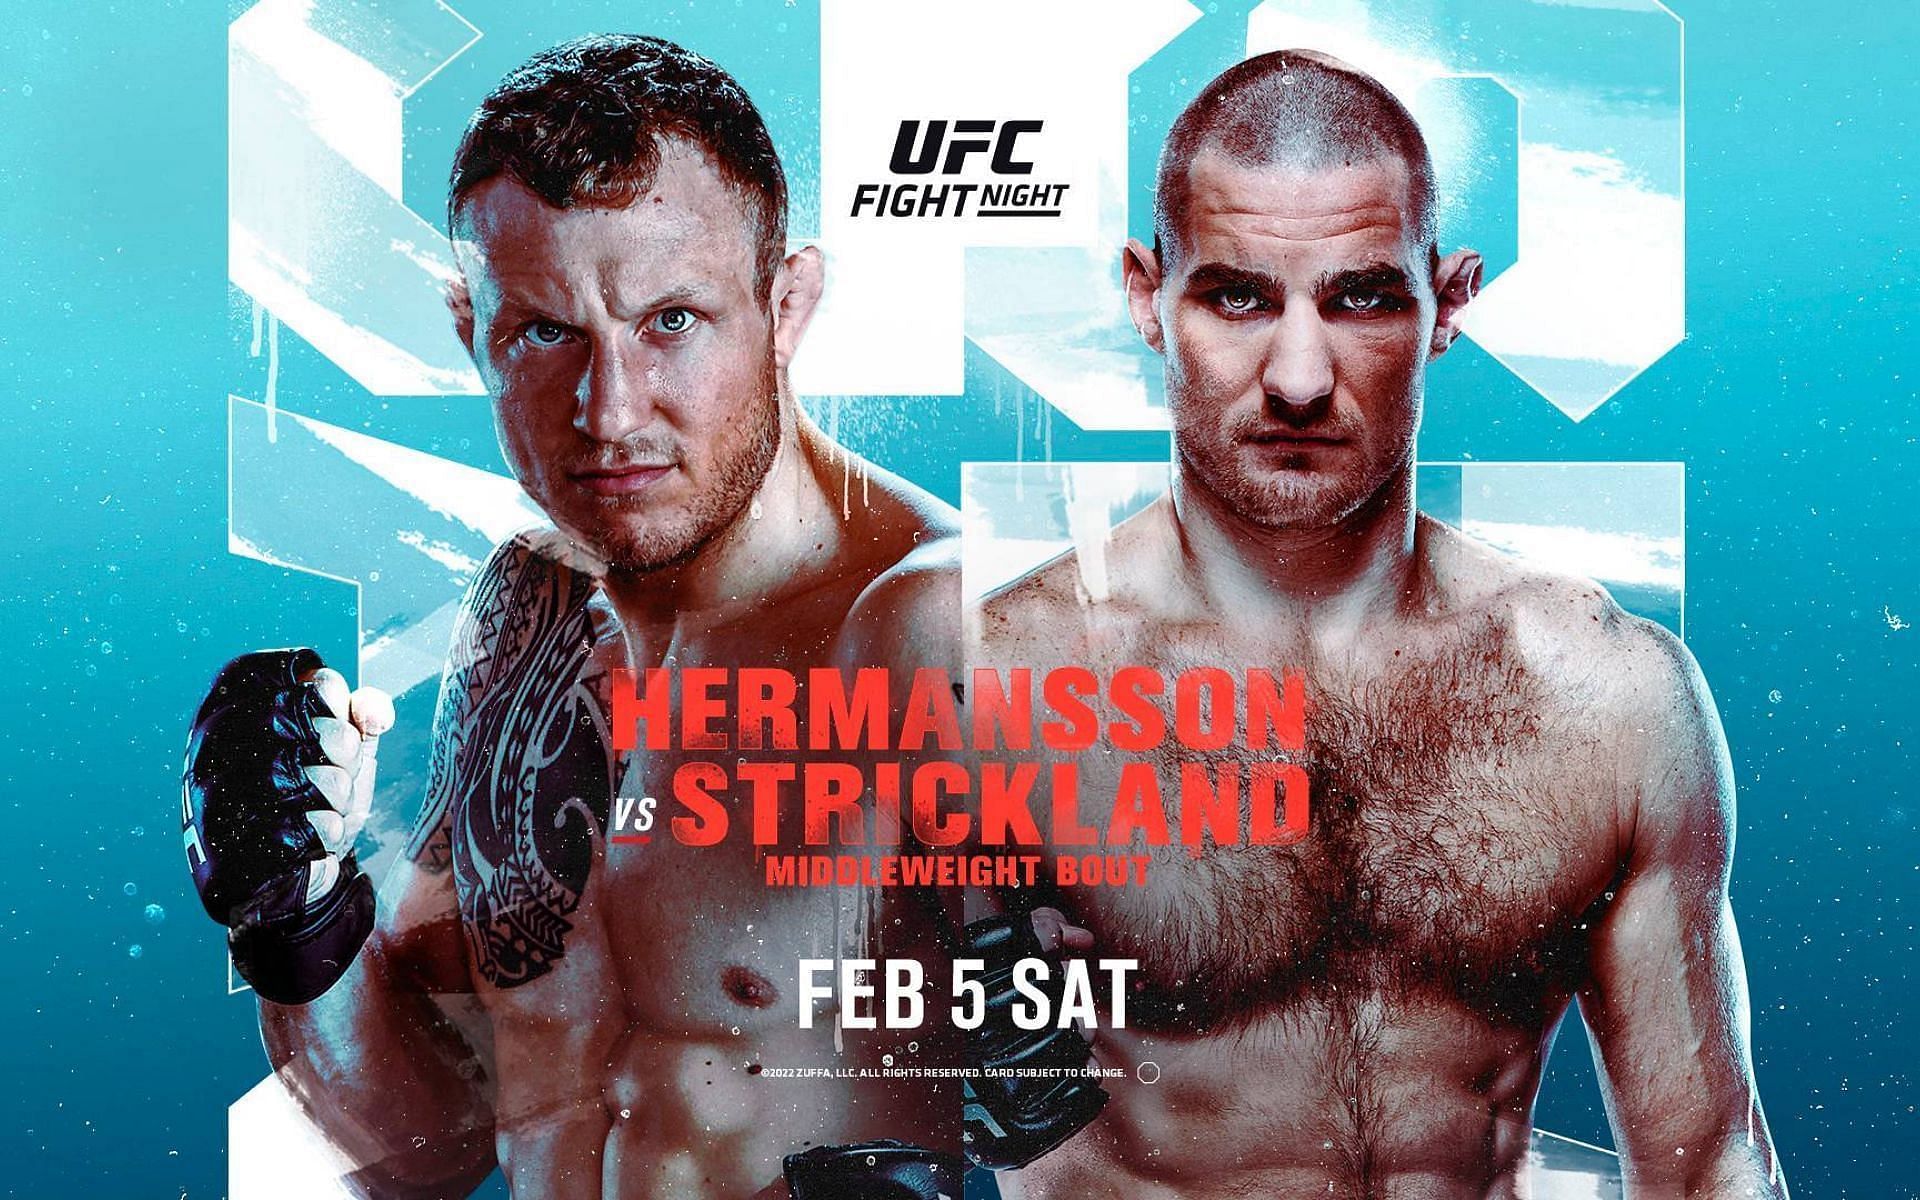 UFC Fight Night: Hermansson vs. Strickland - Official poster